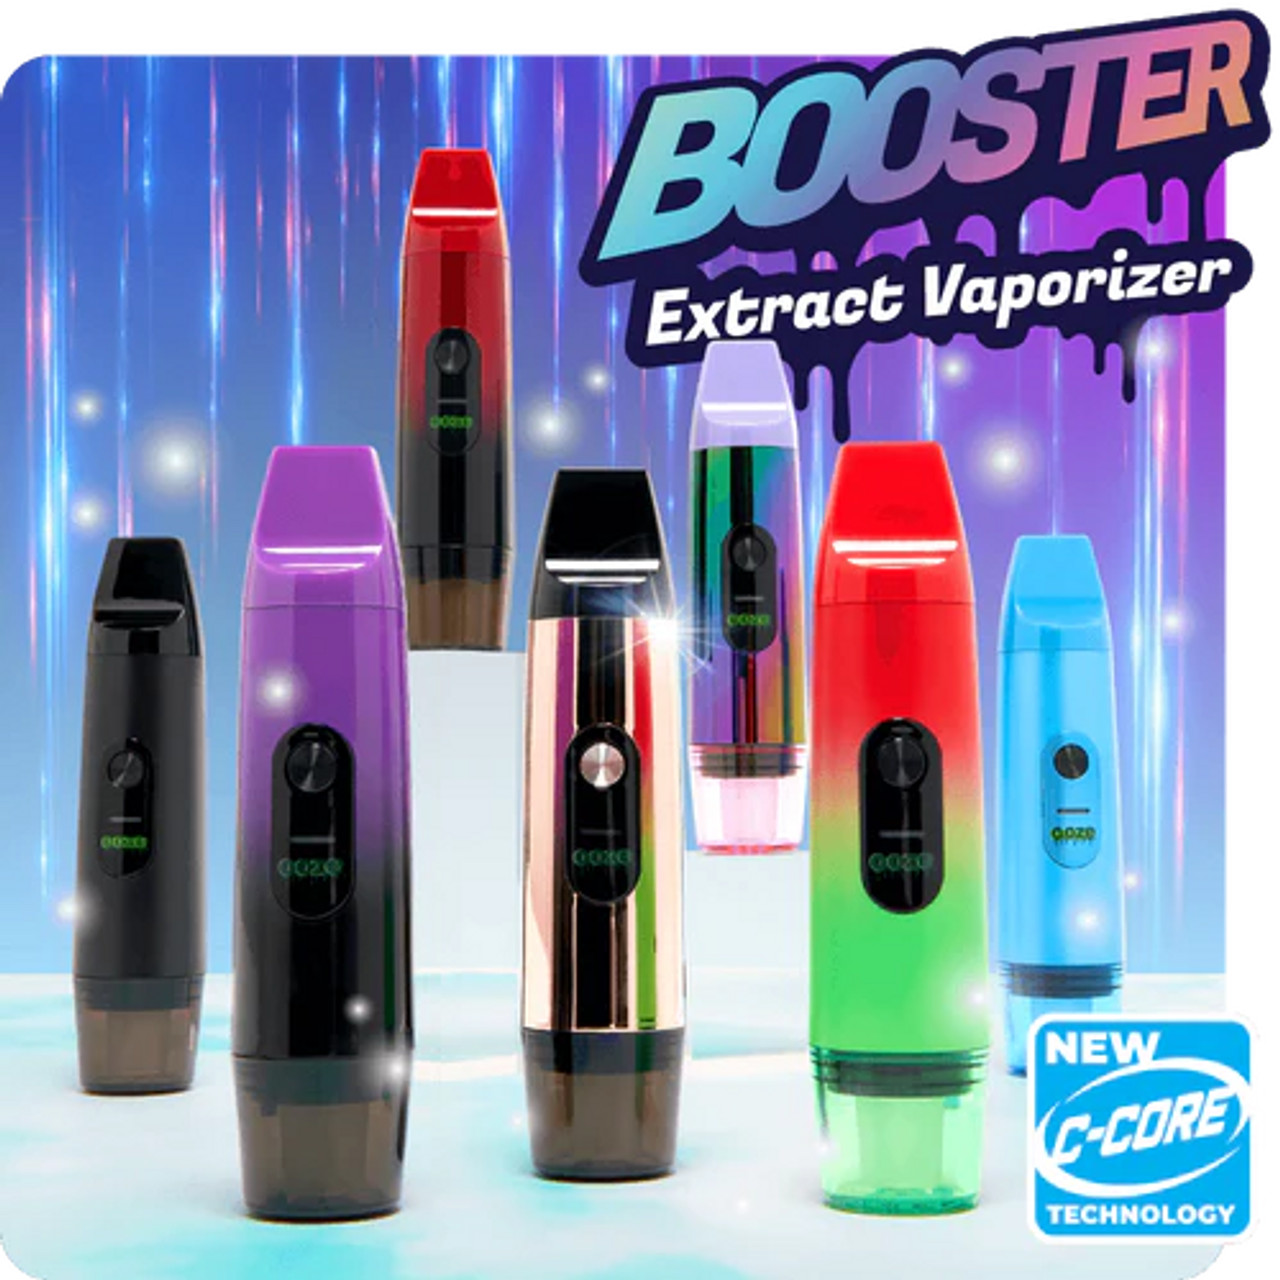 Ooze Booster Extract Vaporizer – C-Core 1100 MAh | Assorted Colors